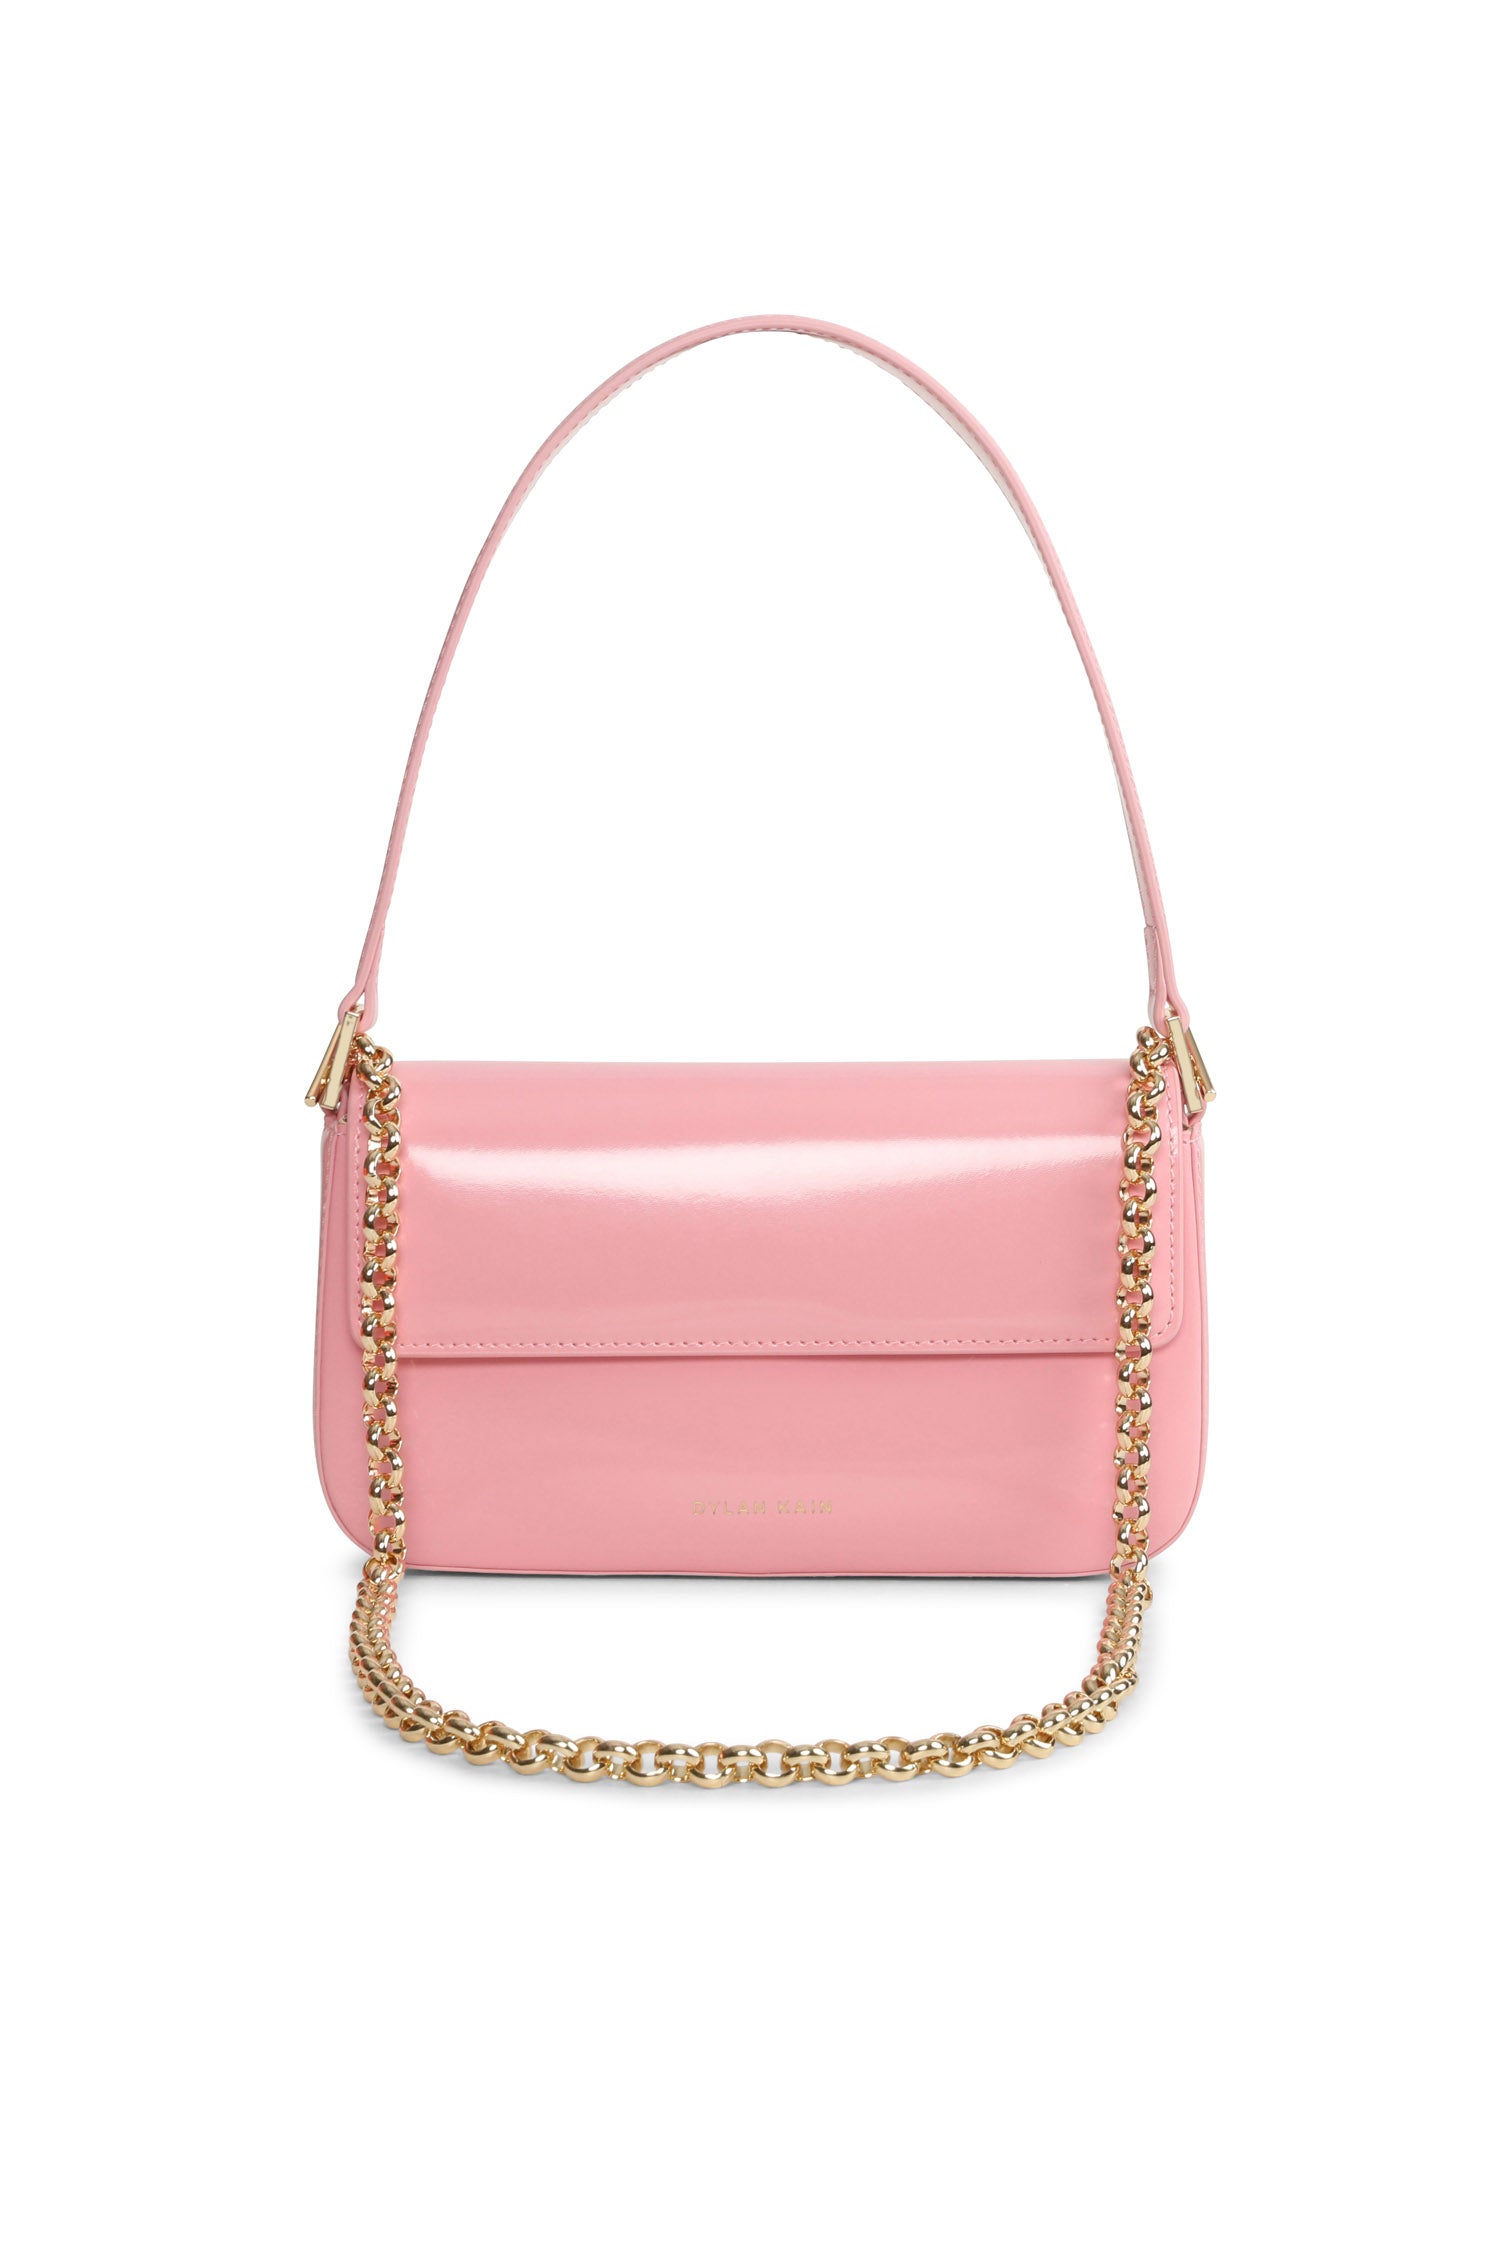 The Baguette Patent Bag Candy Pink Light Gold